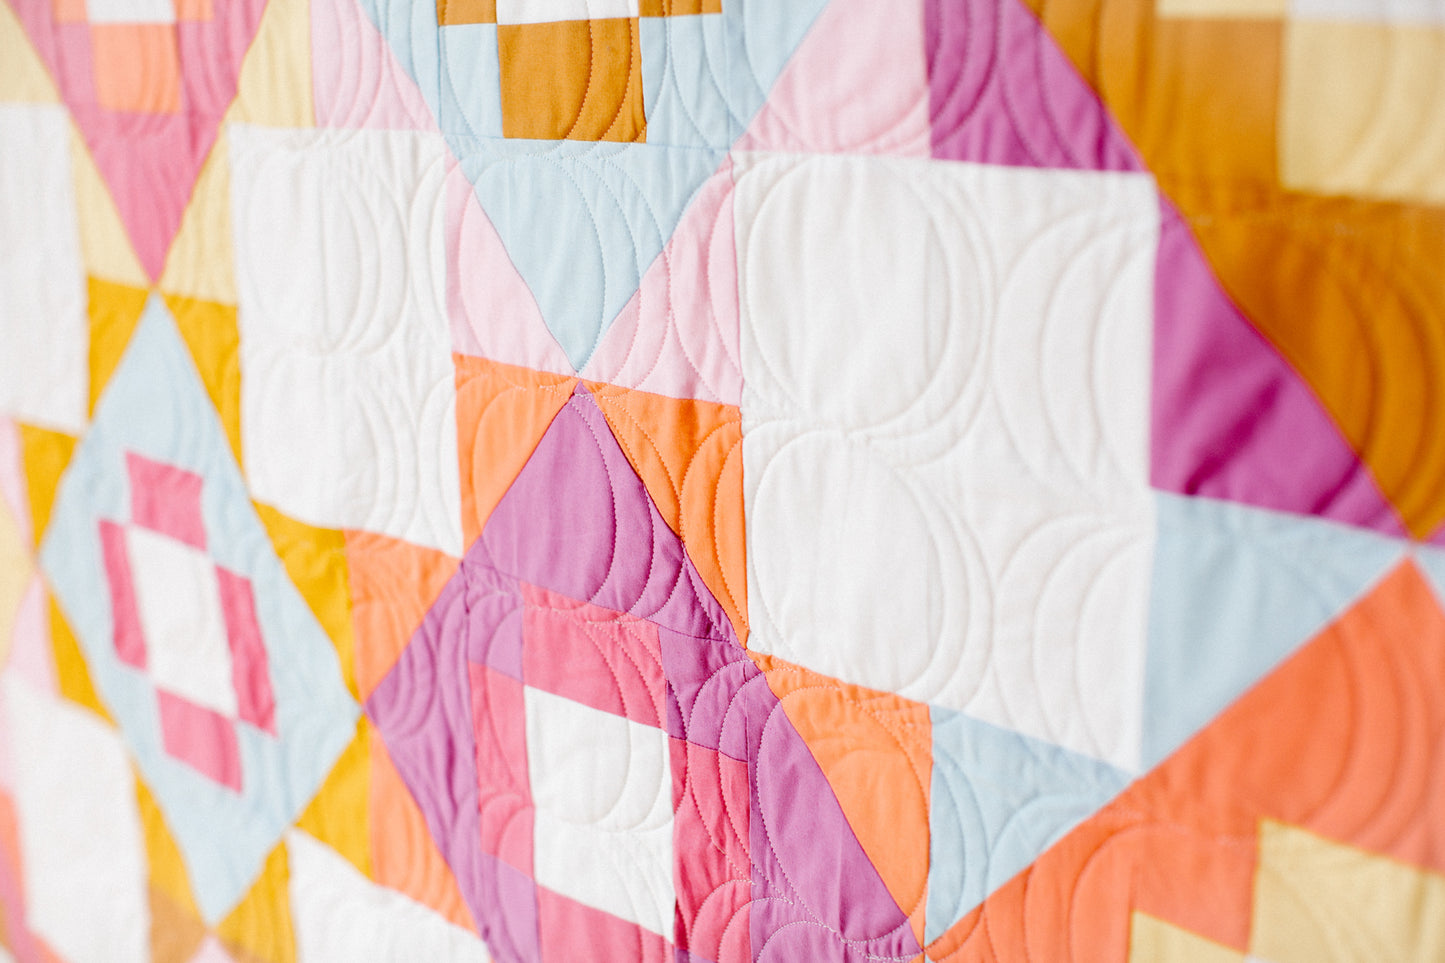 Meadowland Quilt Pattern - Printed